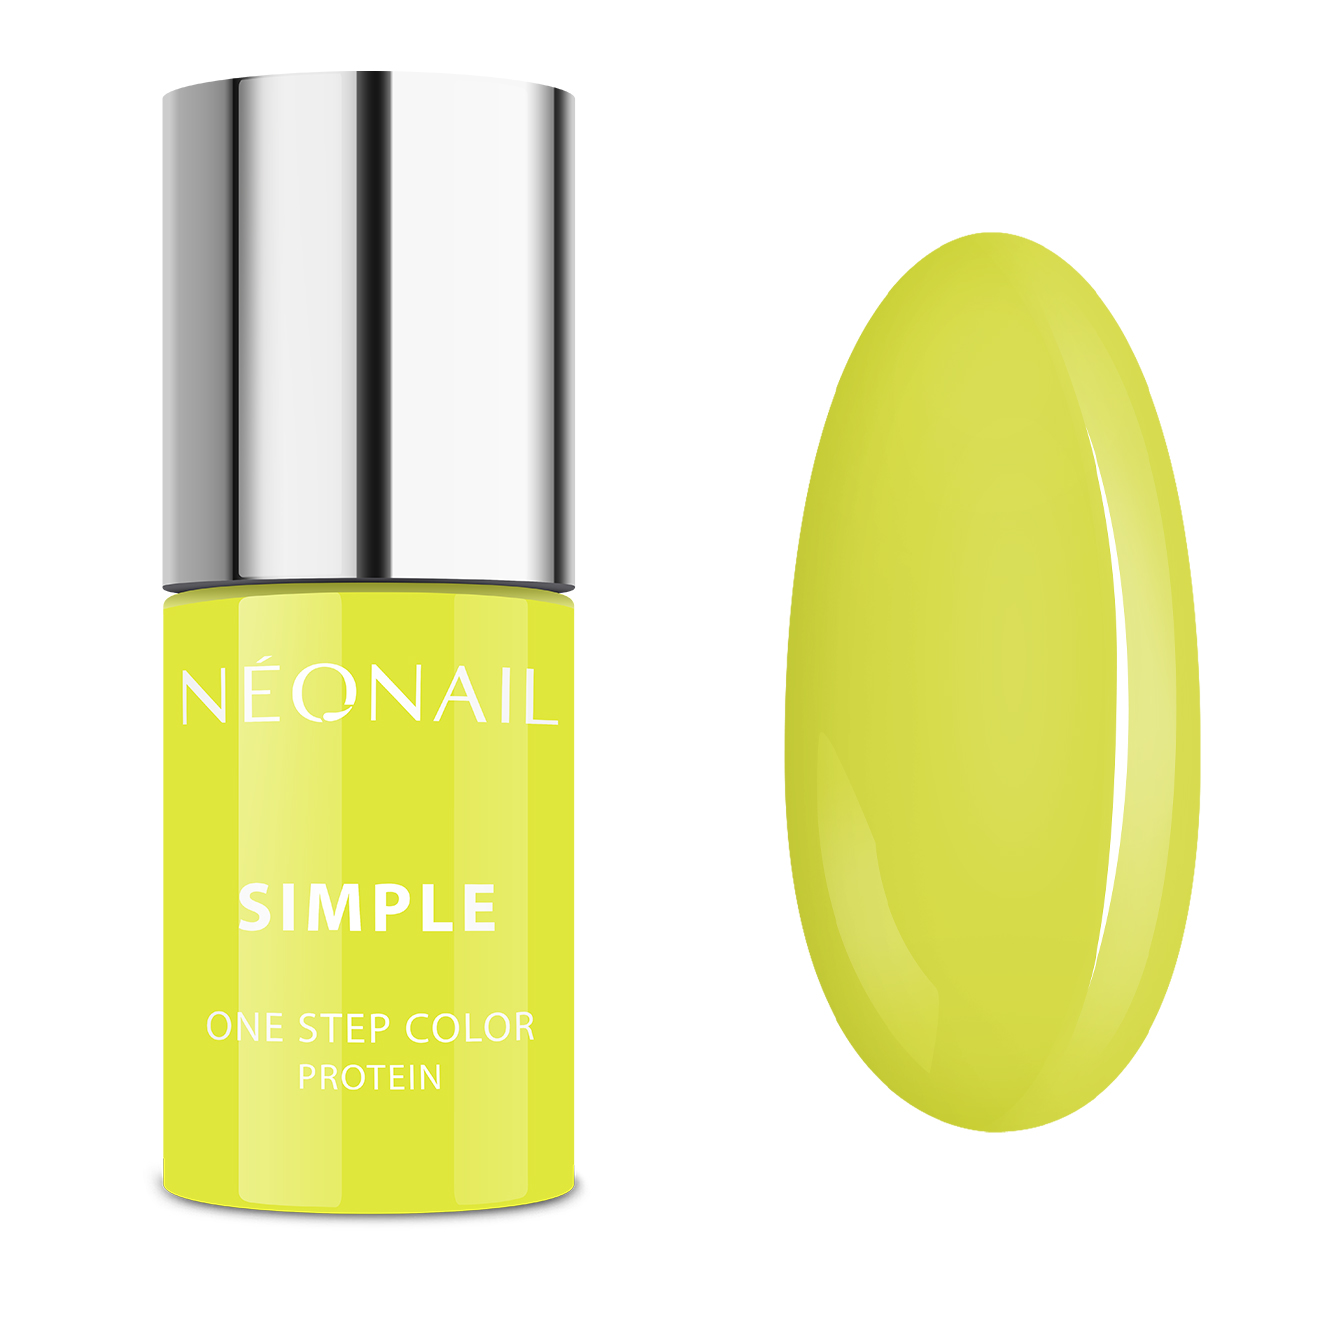 NeoNail Simple One Step - Sunny 7,2 g